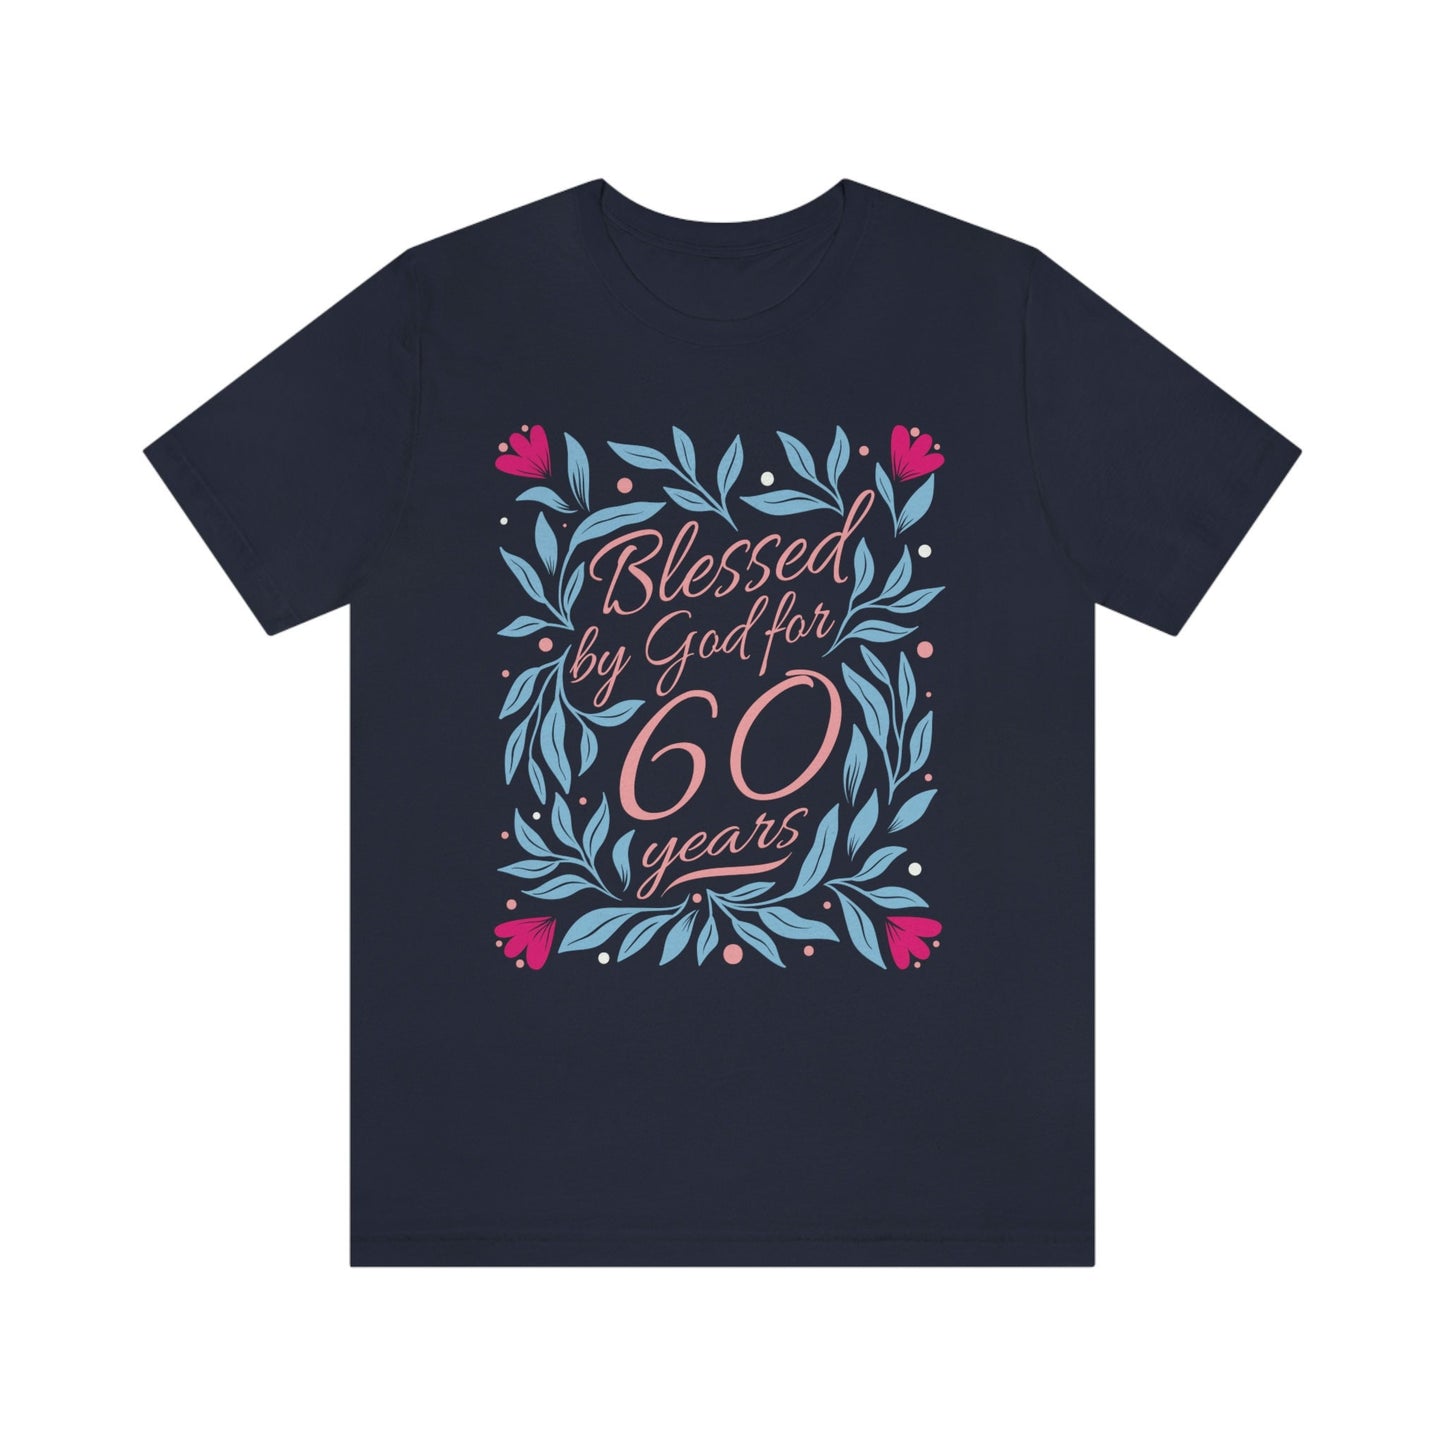 Blessed by God for 60 years gift t-shirt for woman or wife, 60 Anniversary t-shirt for mother